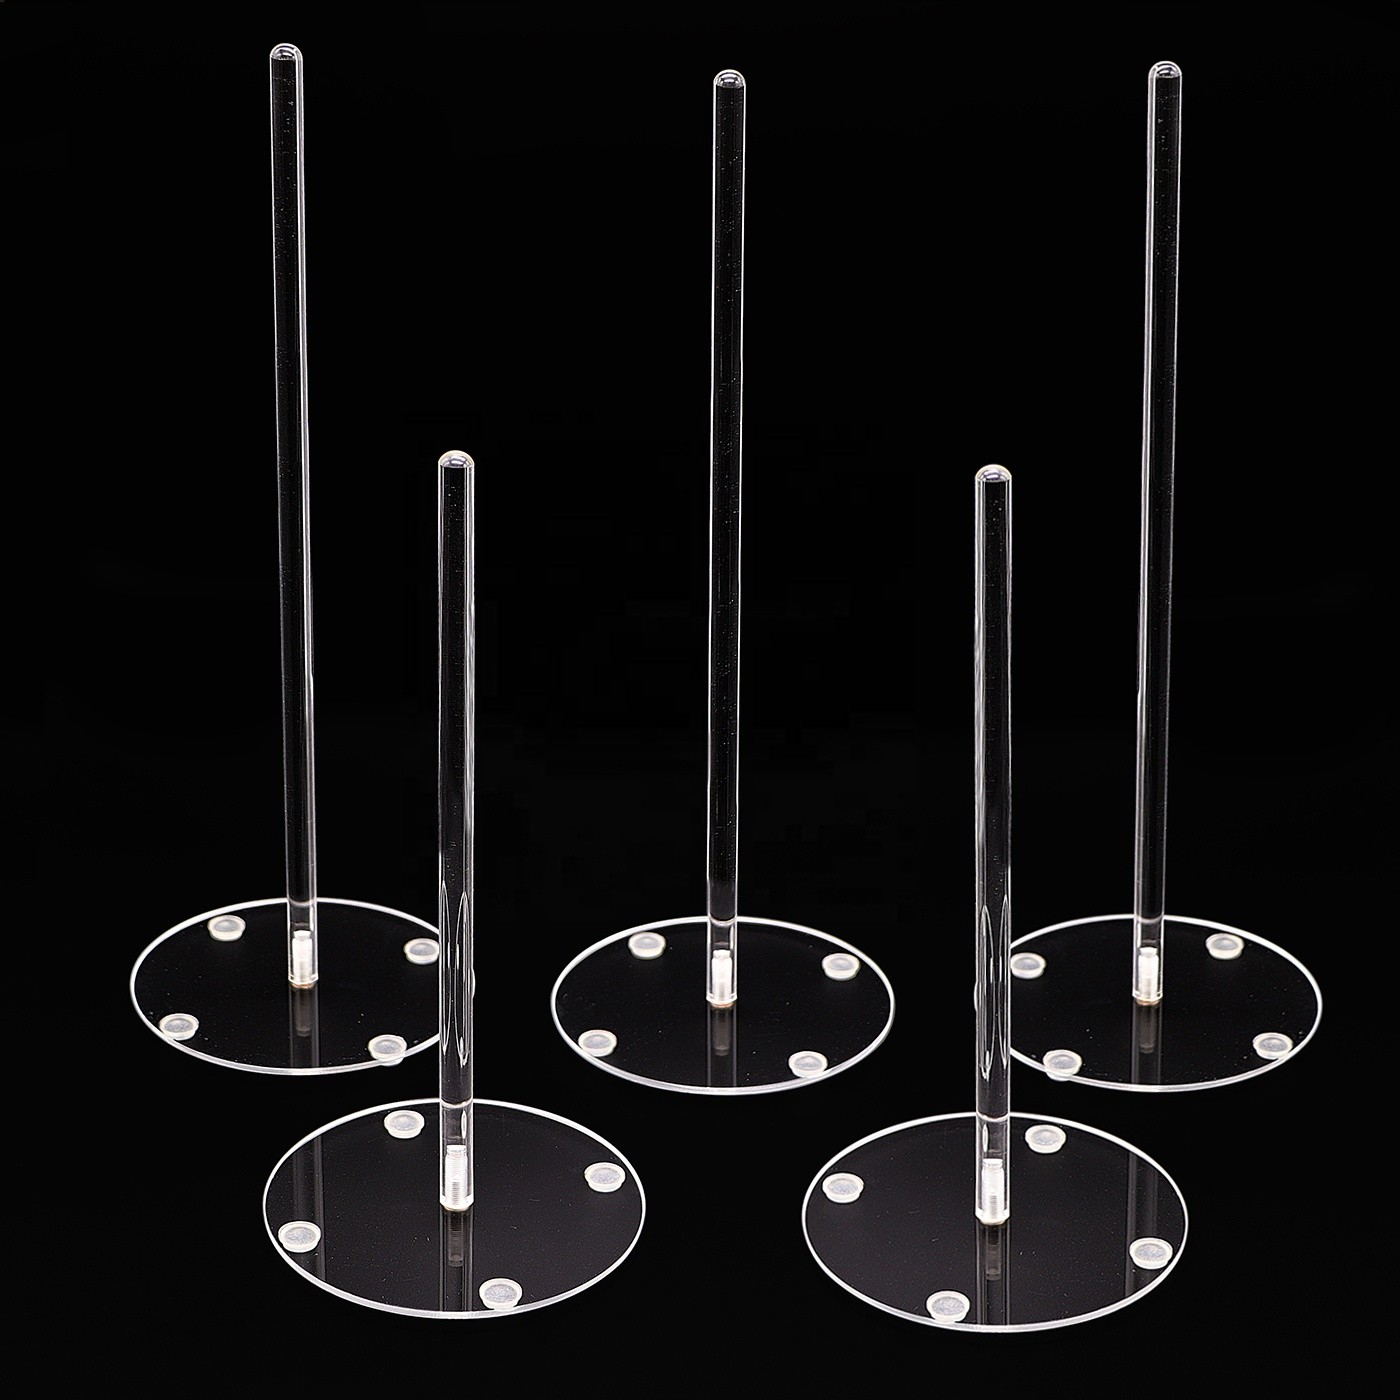  5x5x14 Inch Dessert Acrylic Doughnut Stand For Wedding Decoration Display Manufactures